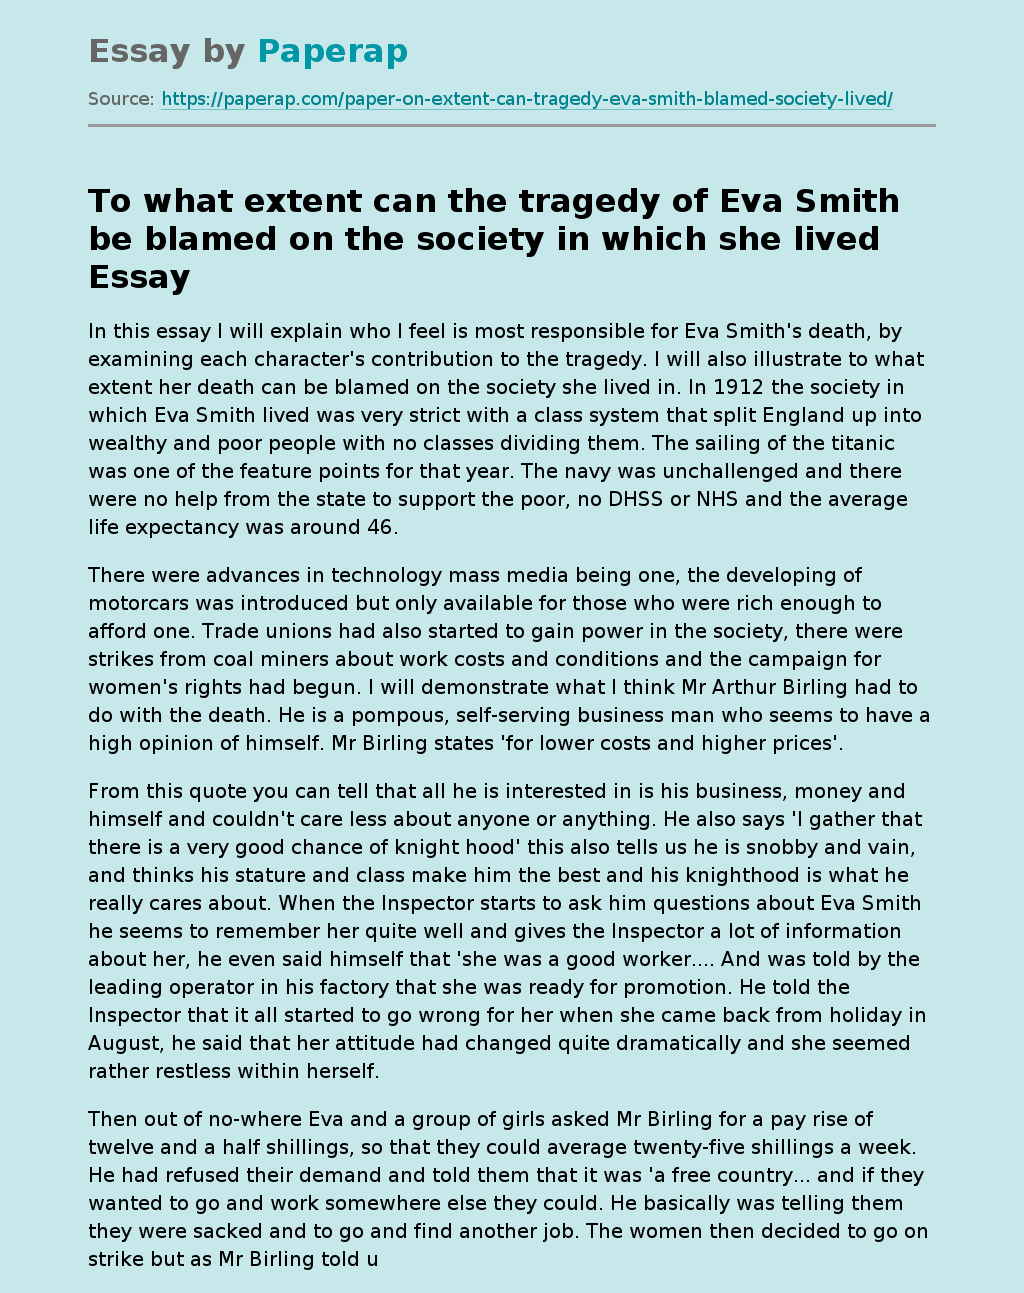 To What Extent can the Tragedy of Eva Smith be Blamed on the Society in Which she Lived